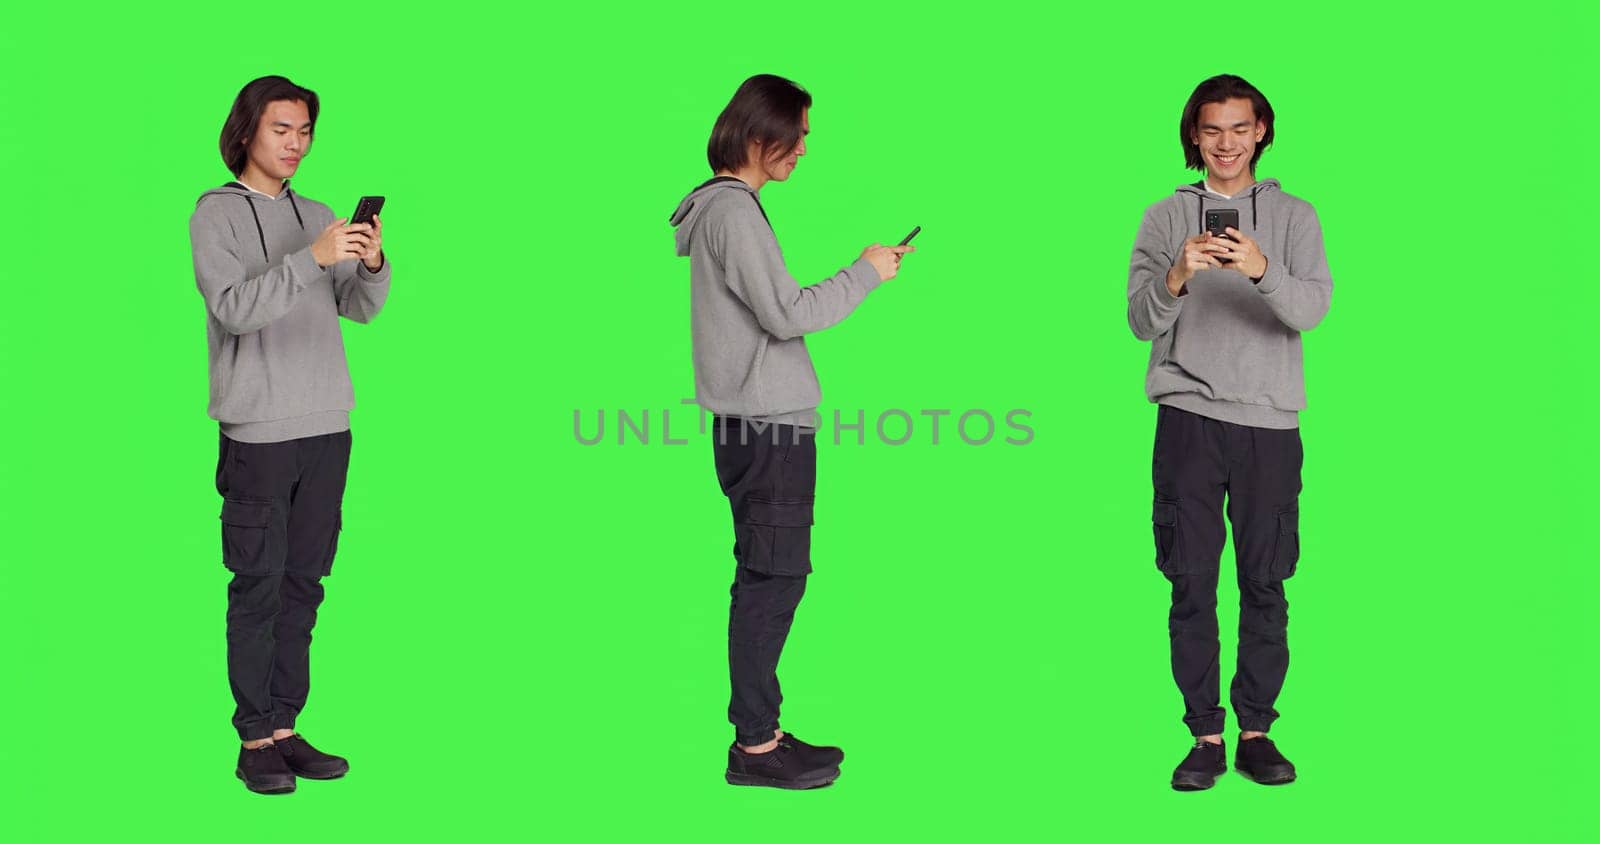 Adult texting messages on phone standing over greenscreen background, using social media app to chat remotely with friends. Asian joyful person messaging on modern smartphone.